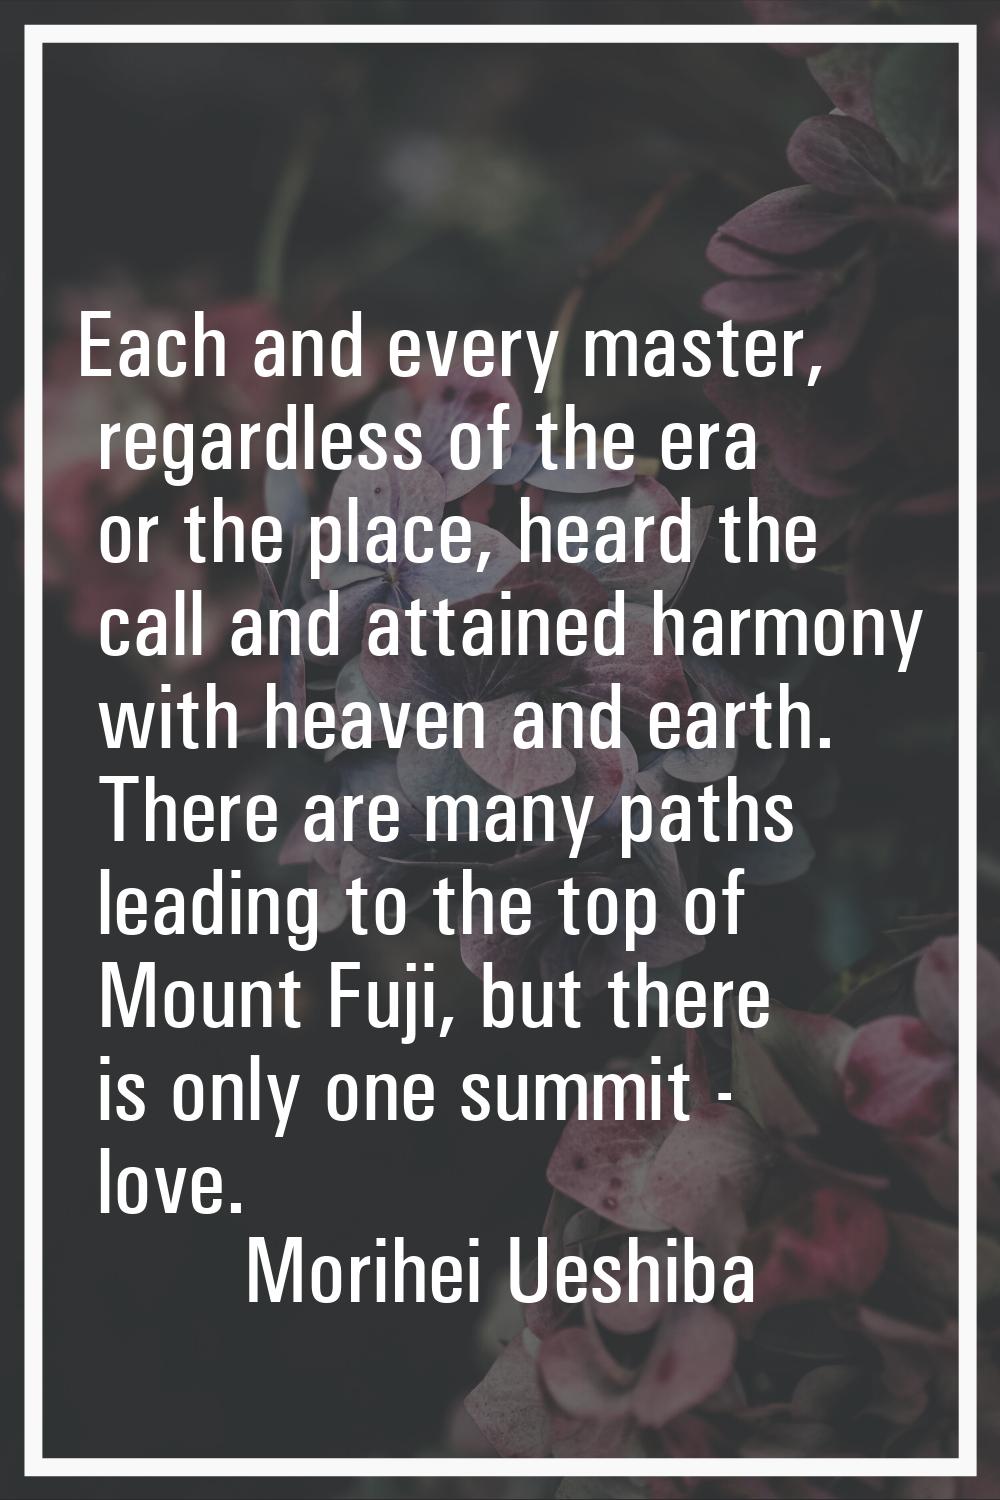 Each and every master, regardless of the era or the place, heard the call and attained harmony with